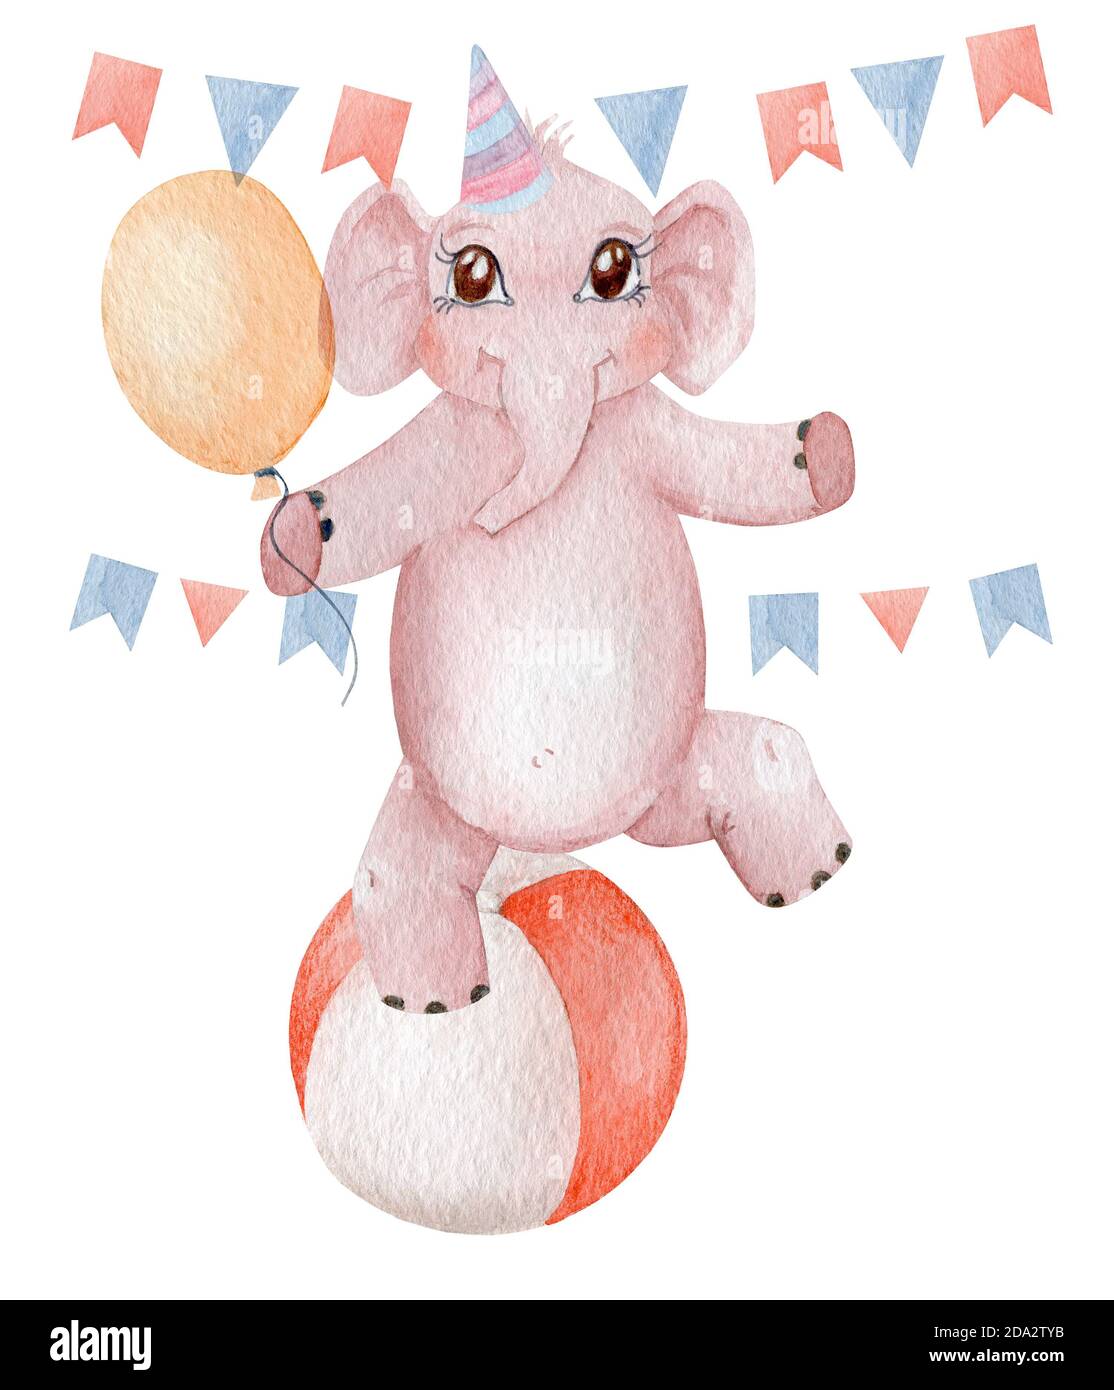 Children party invitation theme. Hand painted pink elephant isolated on white background. Stock Photo